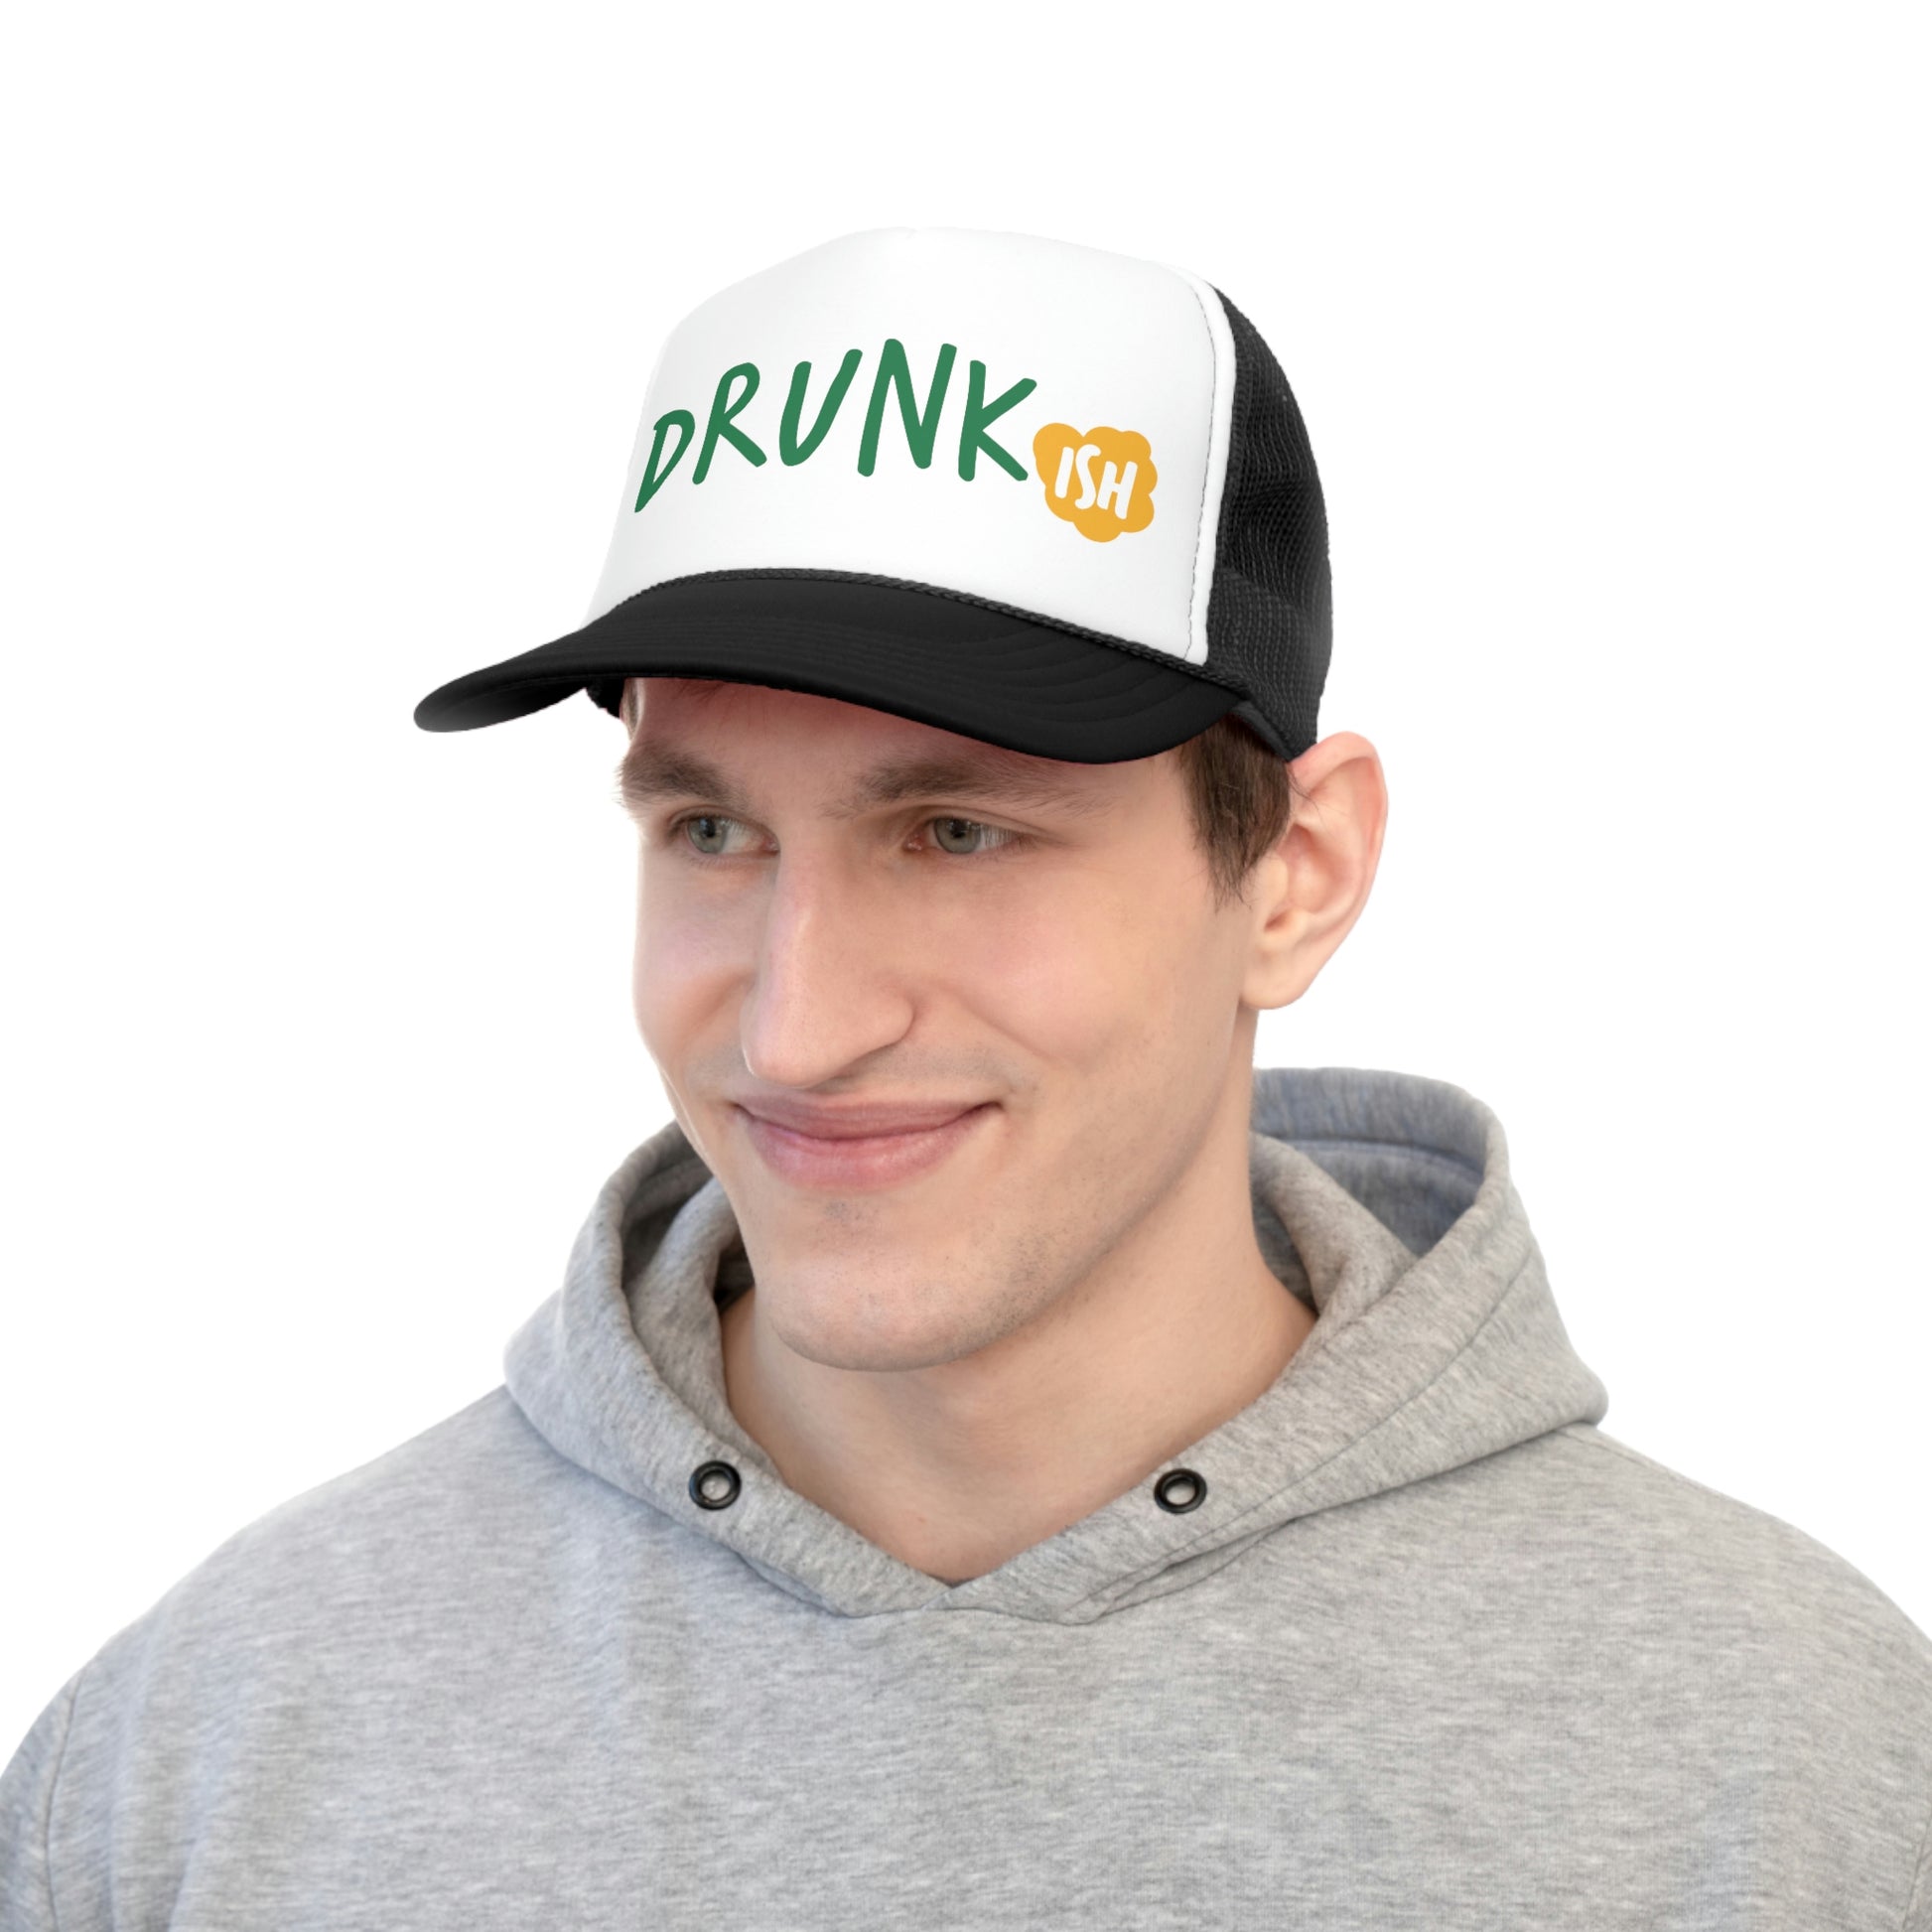 "Drunk-ish" Trucker Caps - Weave Got Gifts - Unique Gifts You Won’t Find Anywhere Else!